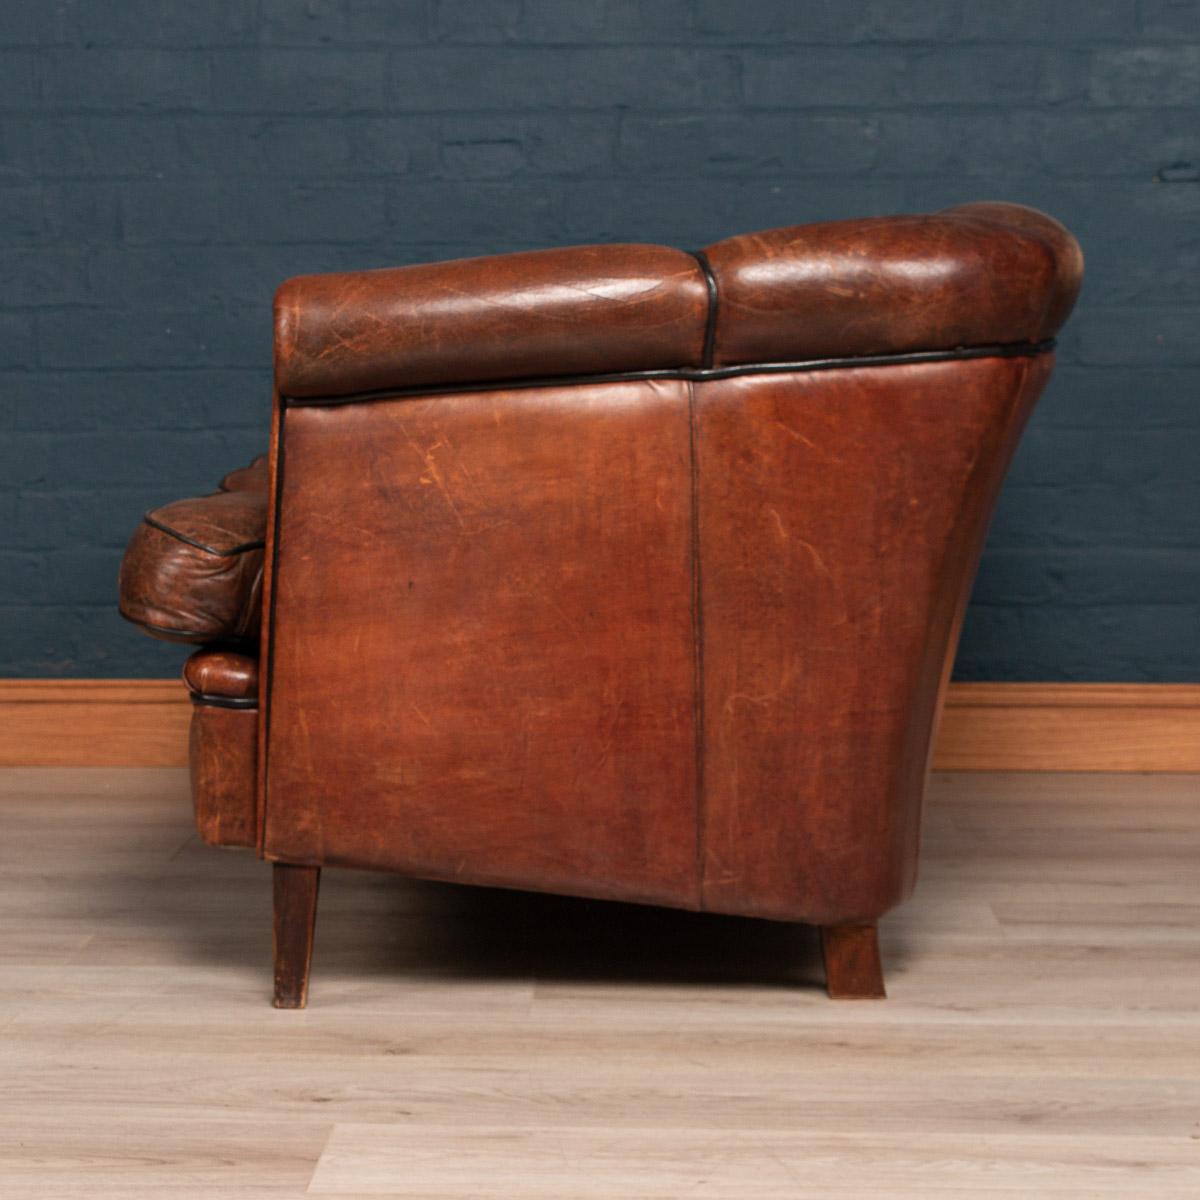 A very elegant scallop back two-seat sheepskin leather sofa, mid-late 20th century, manufactured in Holland and of the finest quality with great patina.

Please note that our interior pieces are located at our Interior Design Showroom in